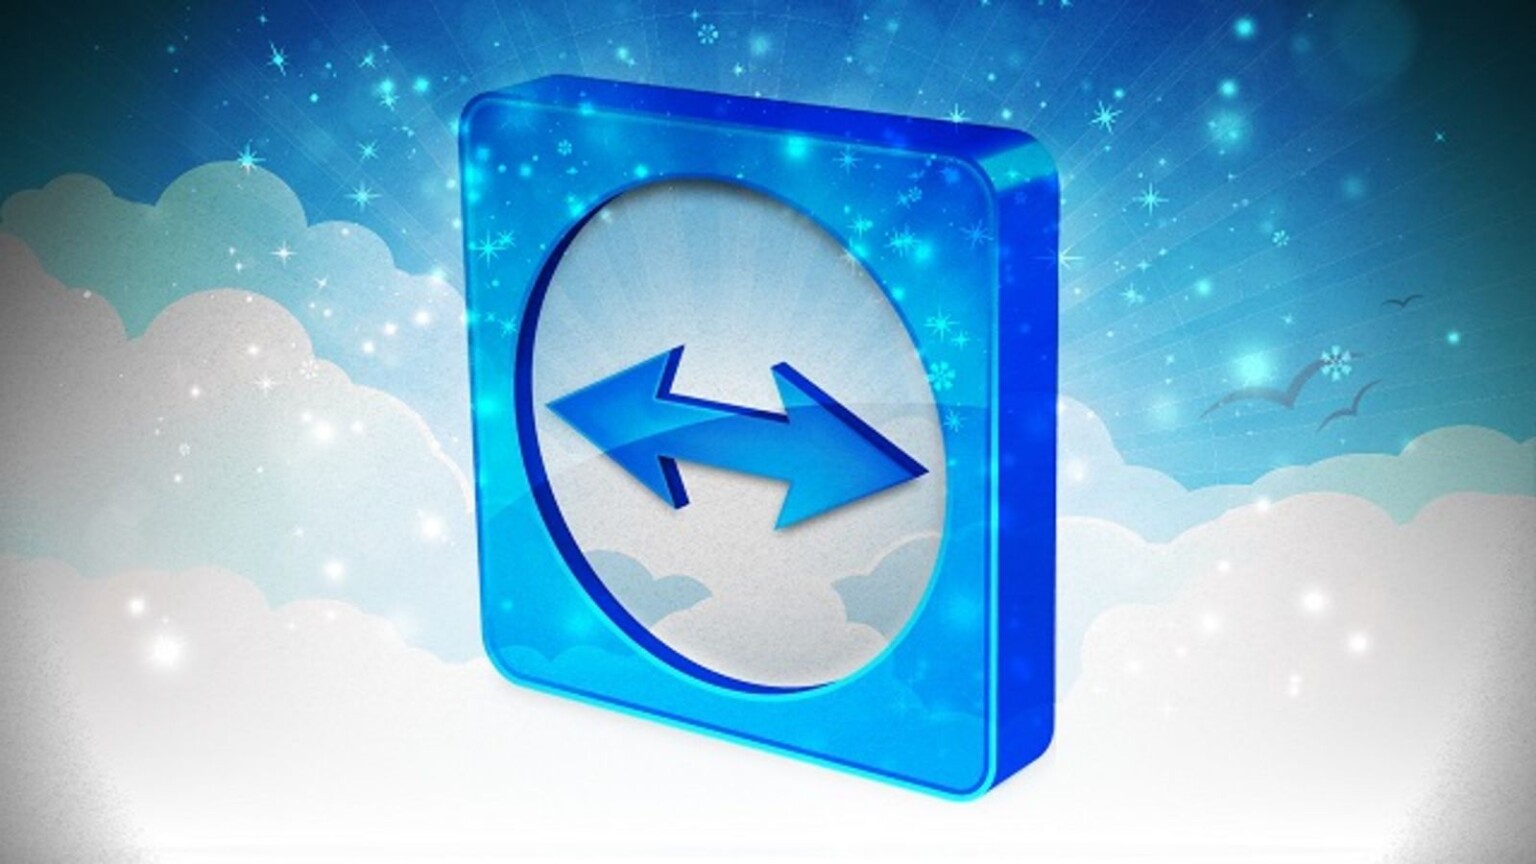 teamviewer alternatives android